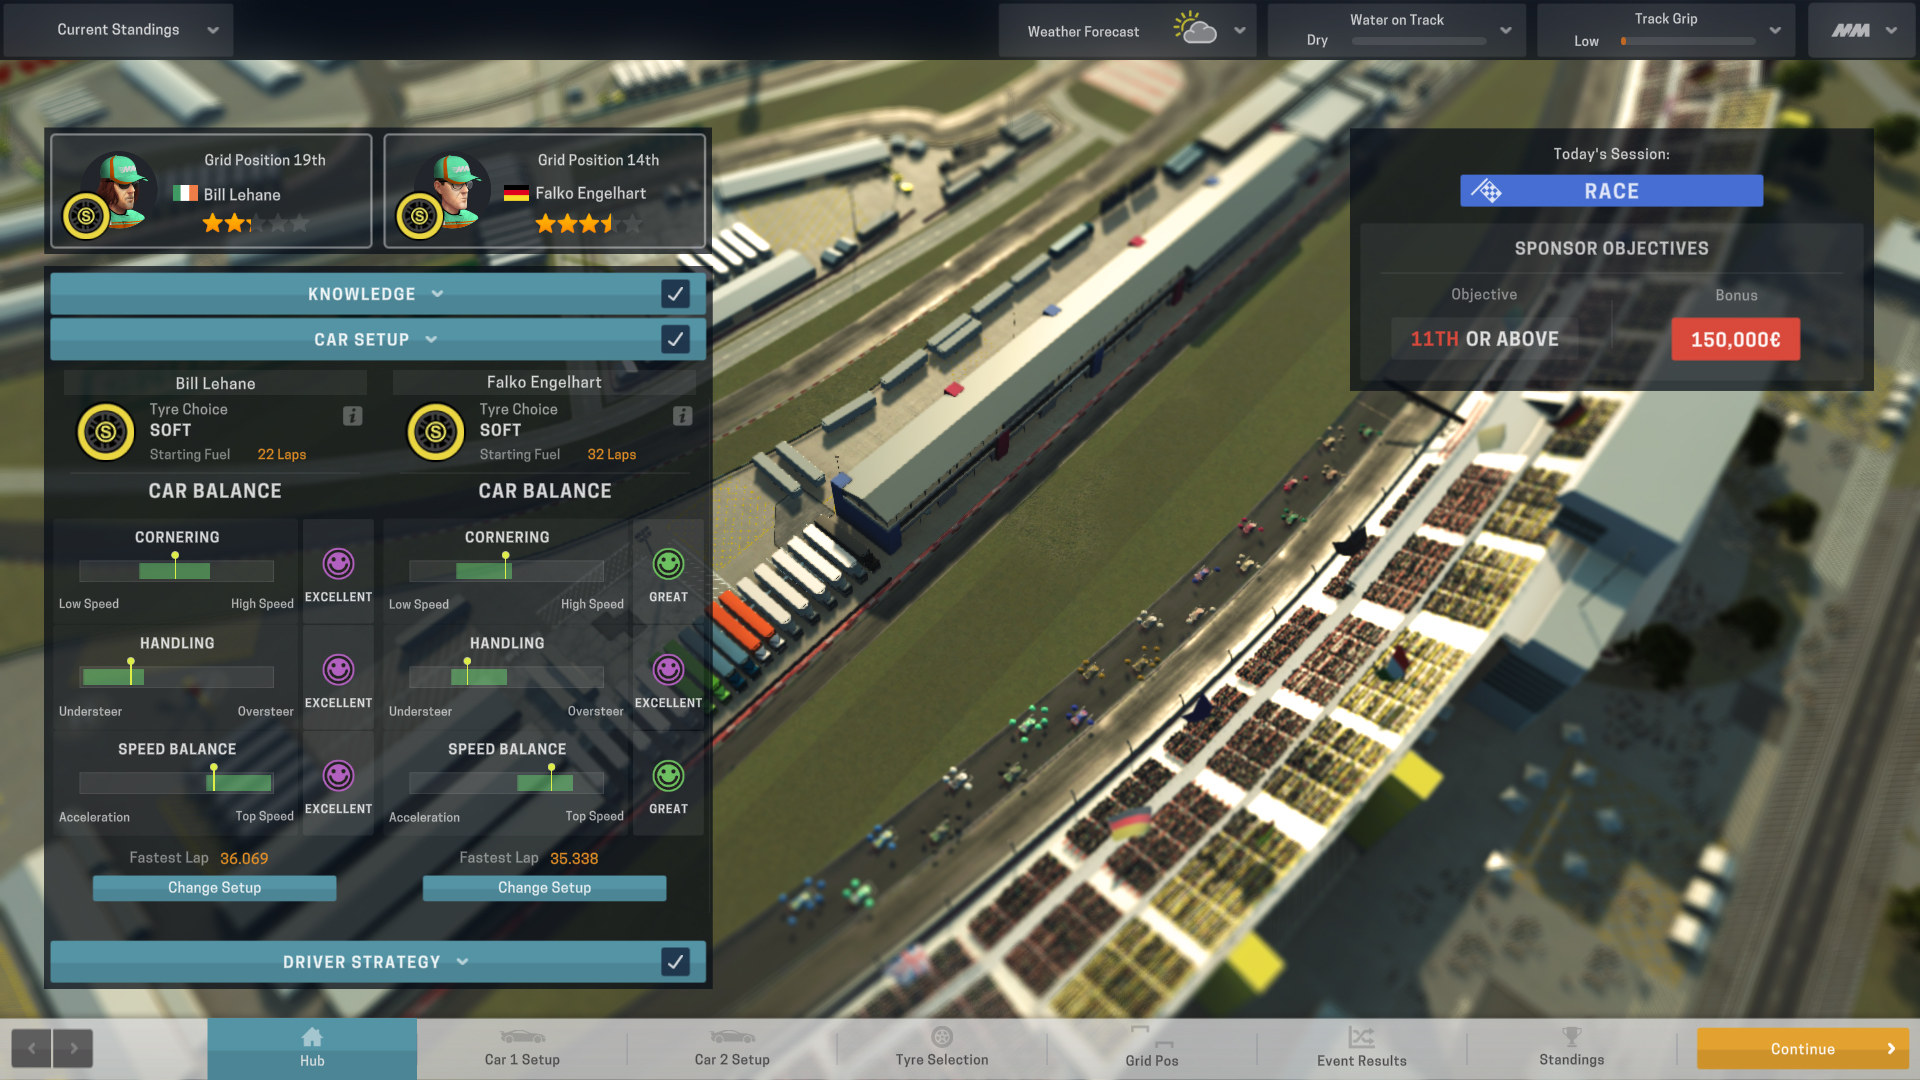 motorsport manager tips for setup and strategy